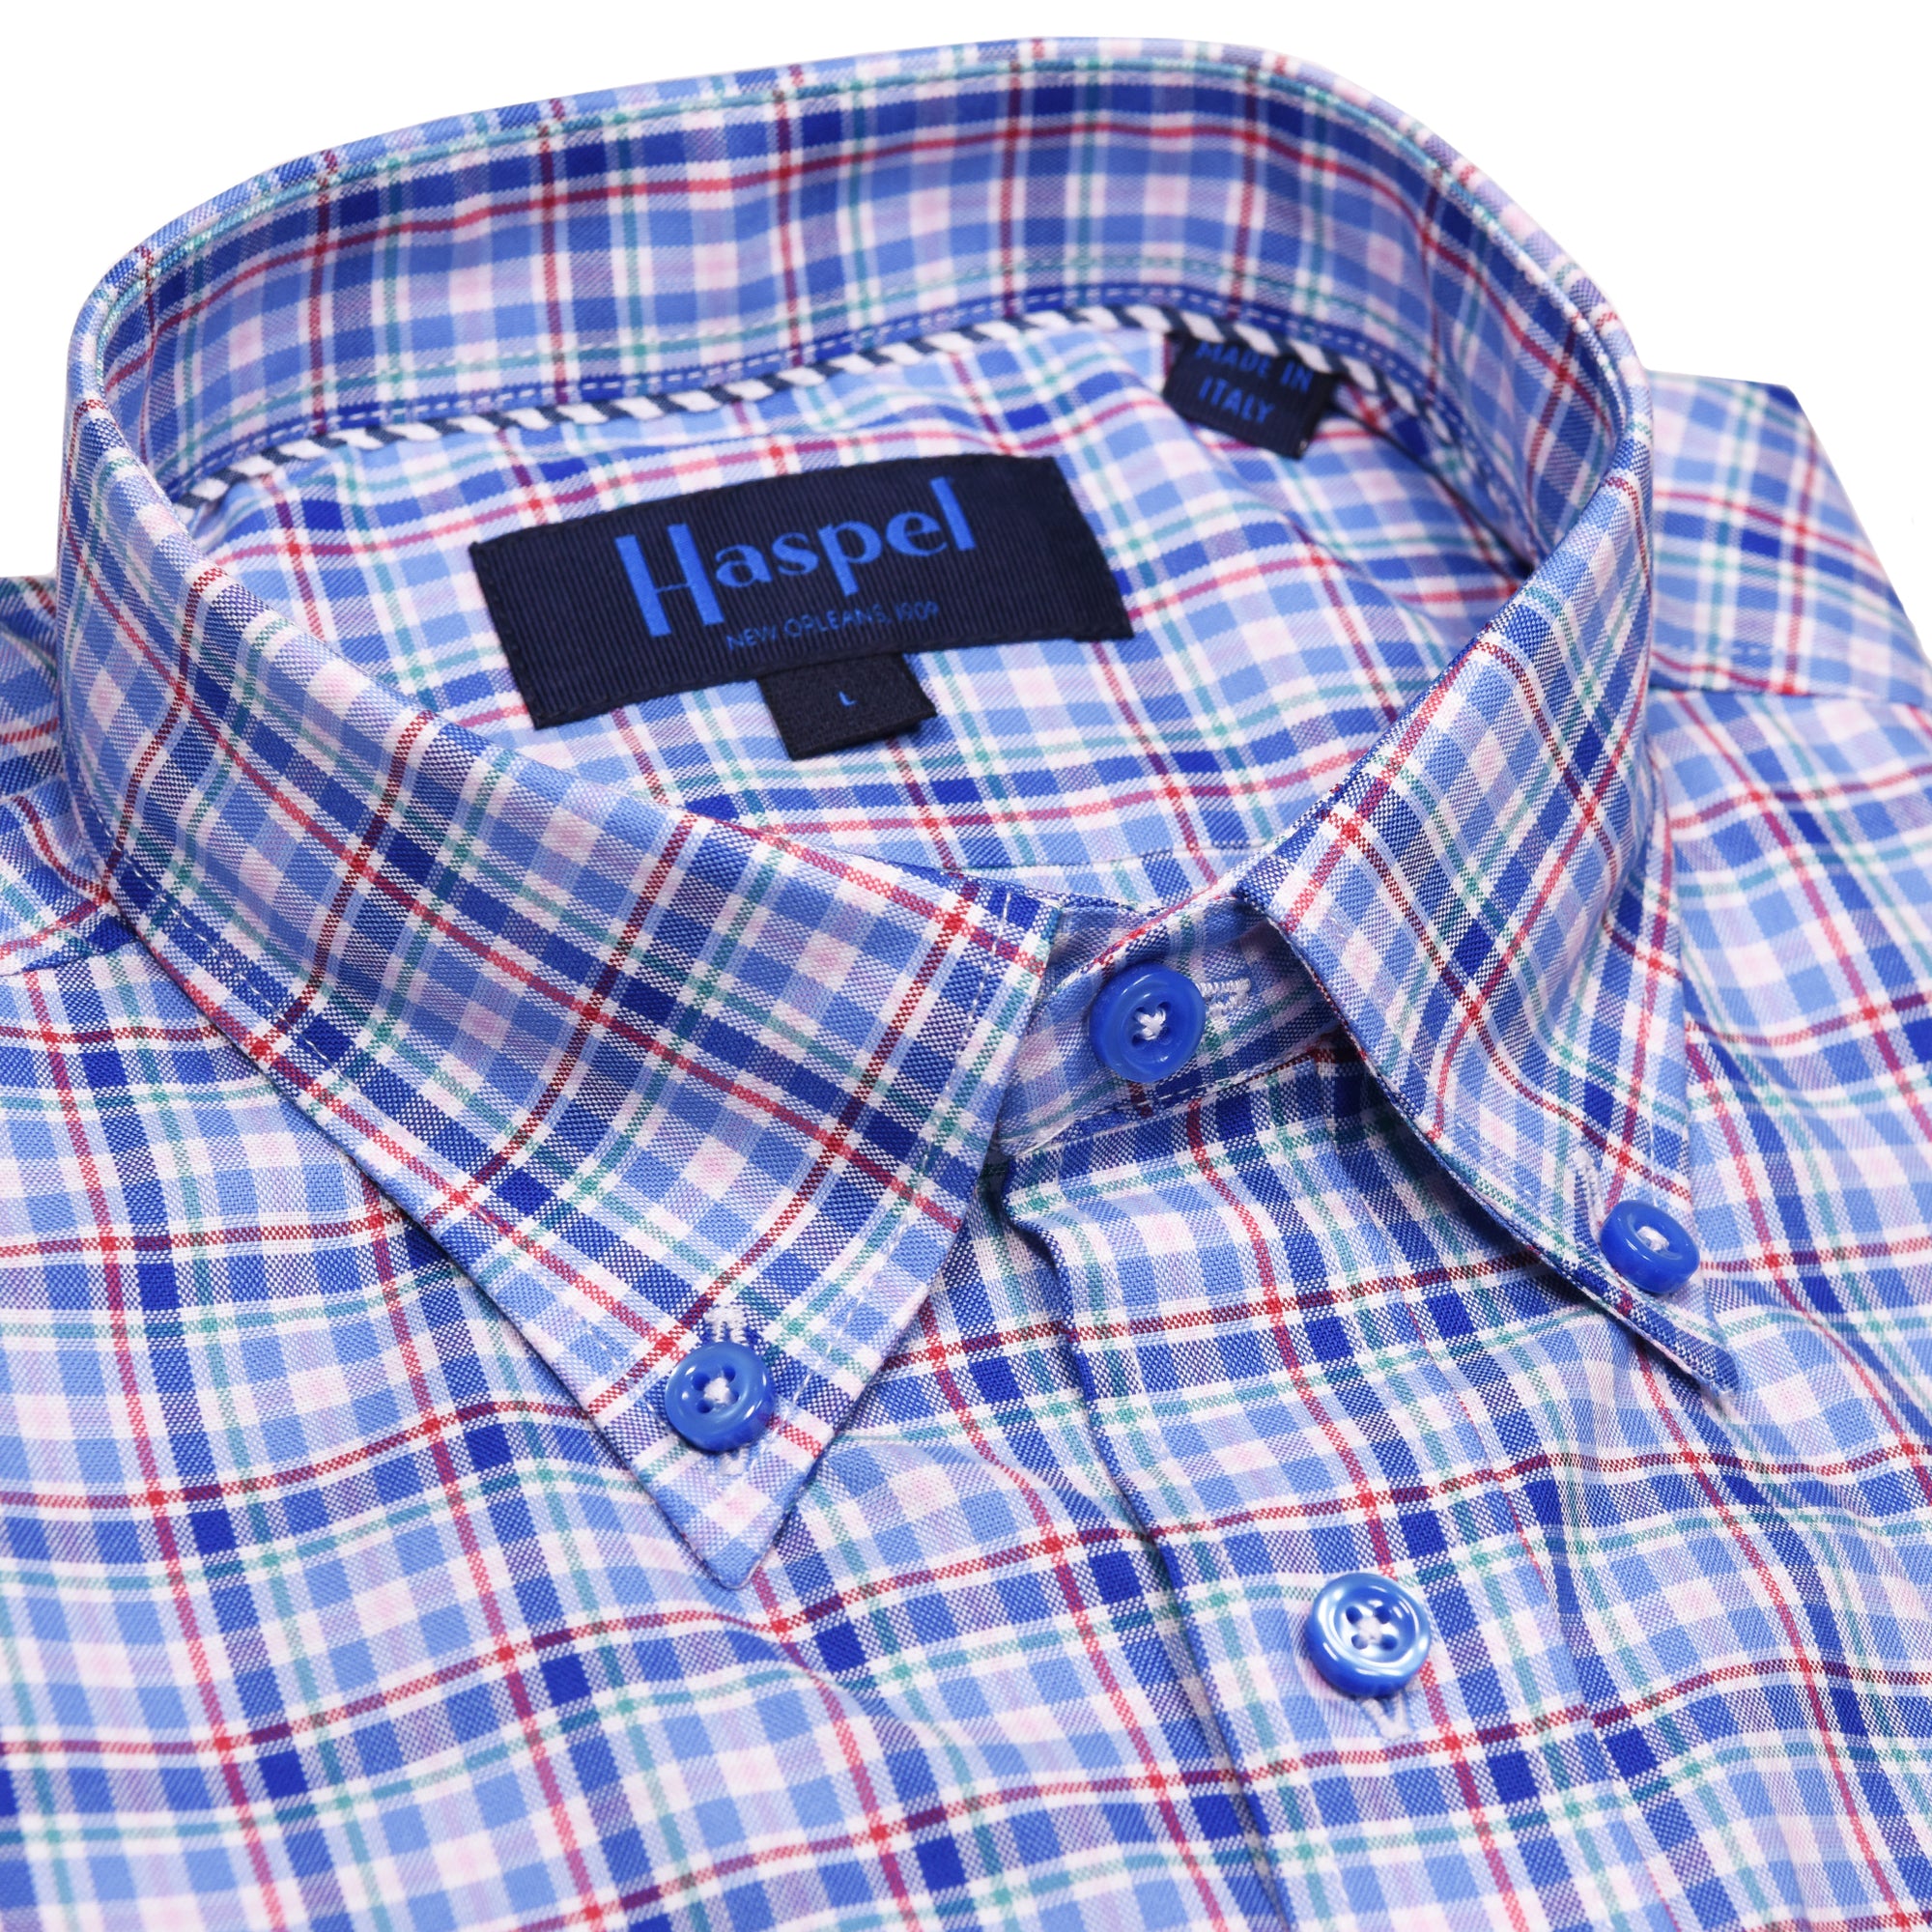 Another blue plaid shirt this is not. Stunning blue buttons highlight this complex yet simply plaid print shirt. Fine lines of red, green, and pink will make them take a closer look. Complex yet smooth, like a sip of Pappy's.  100% Cotton • Button Down Collar • Long Sleeve • Chest Pocket • Machine Washable • Made in Italy